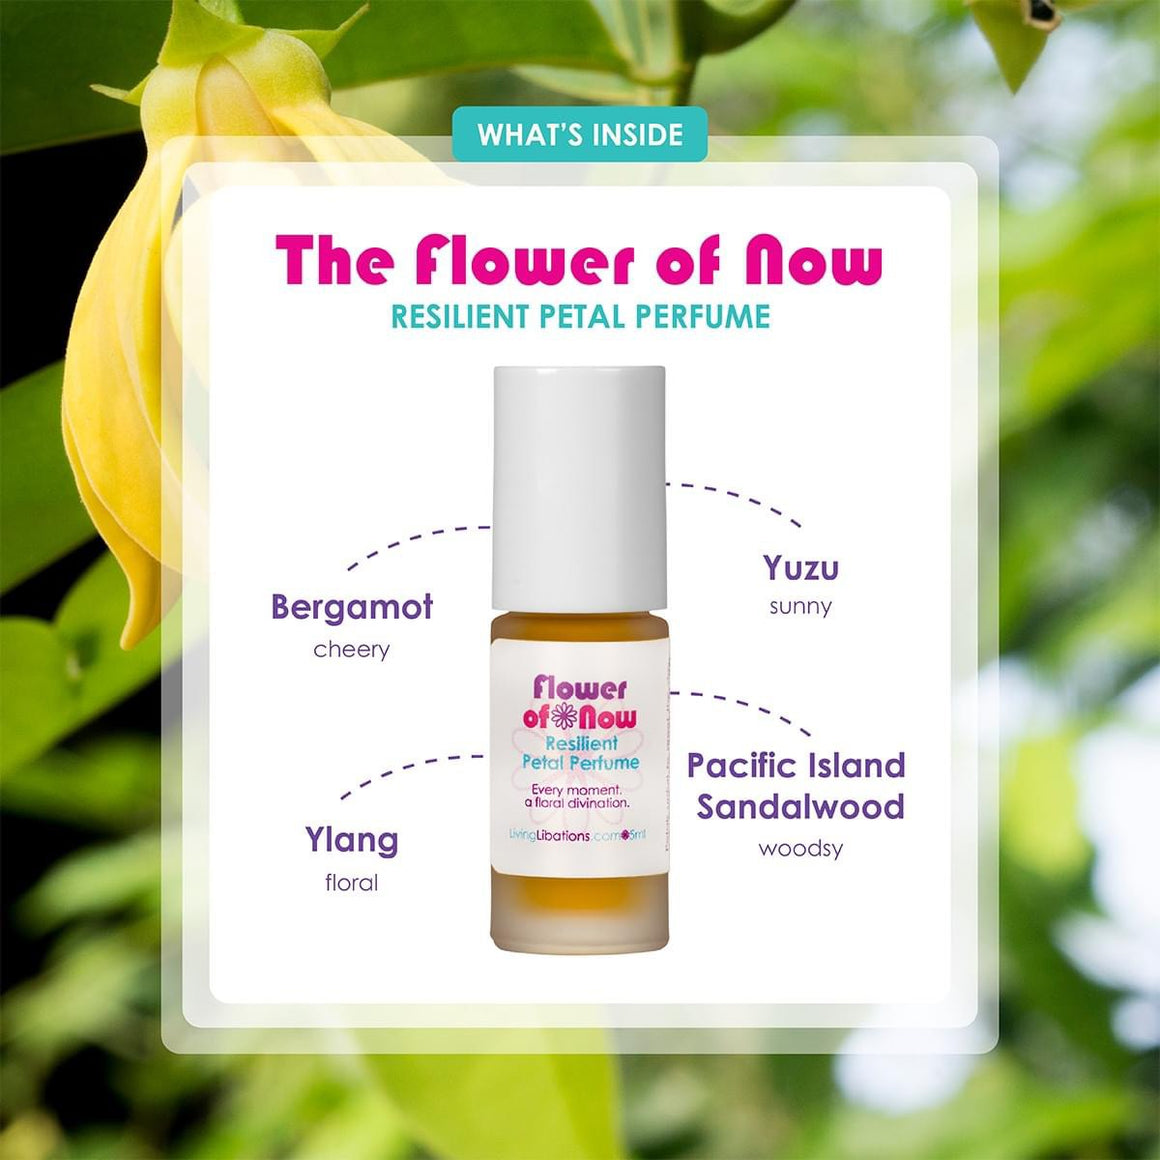 The Flower of Now Resilient Petal Perfume 5ml - Living Libations